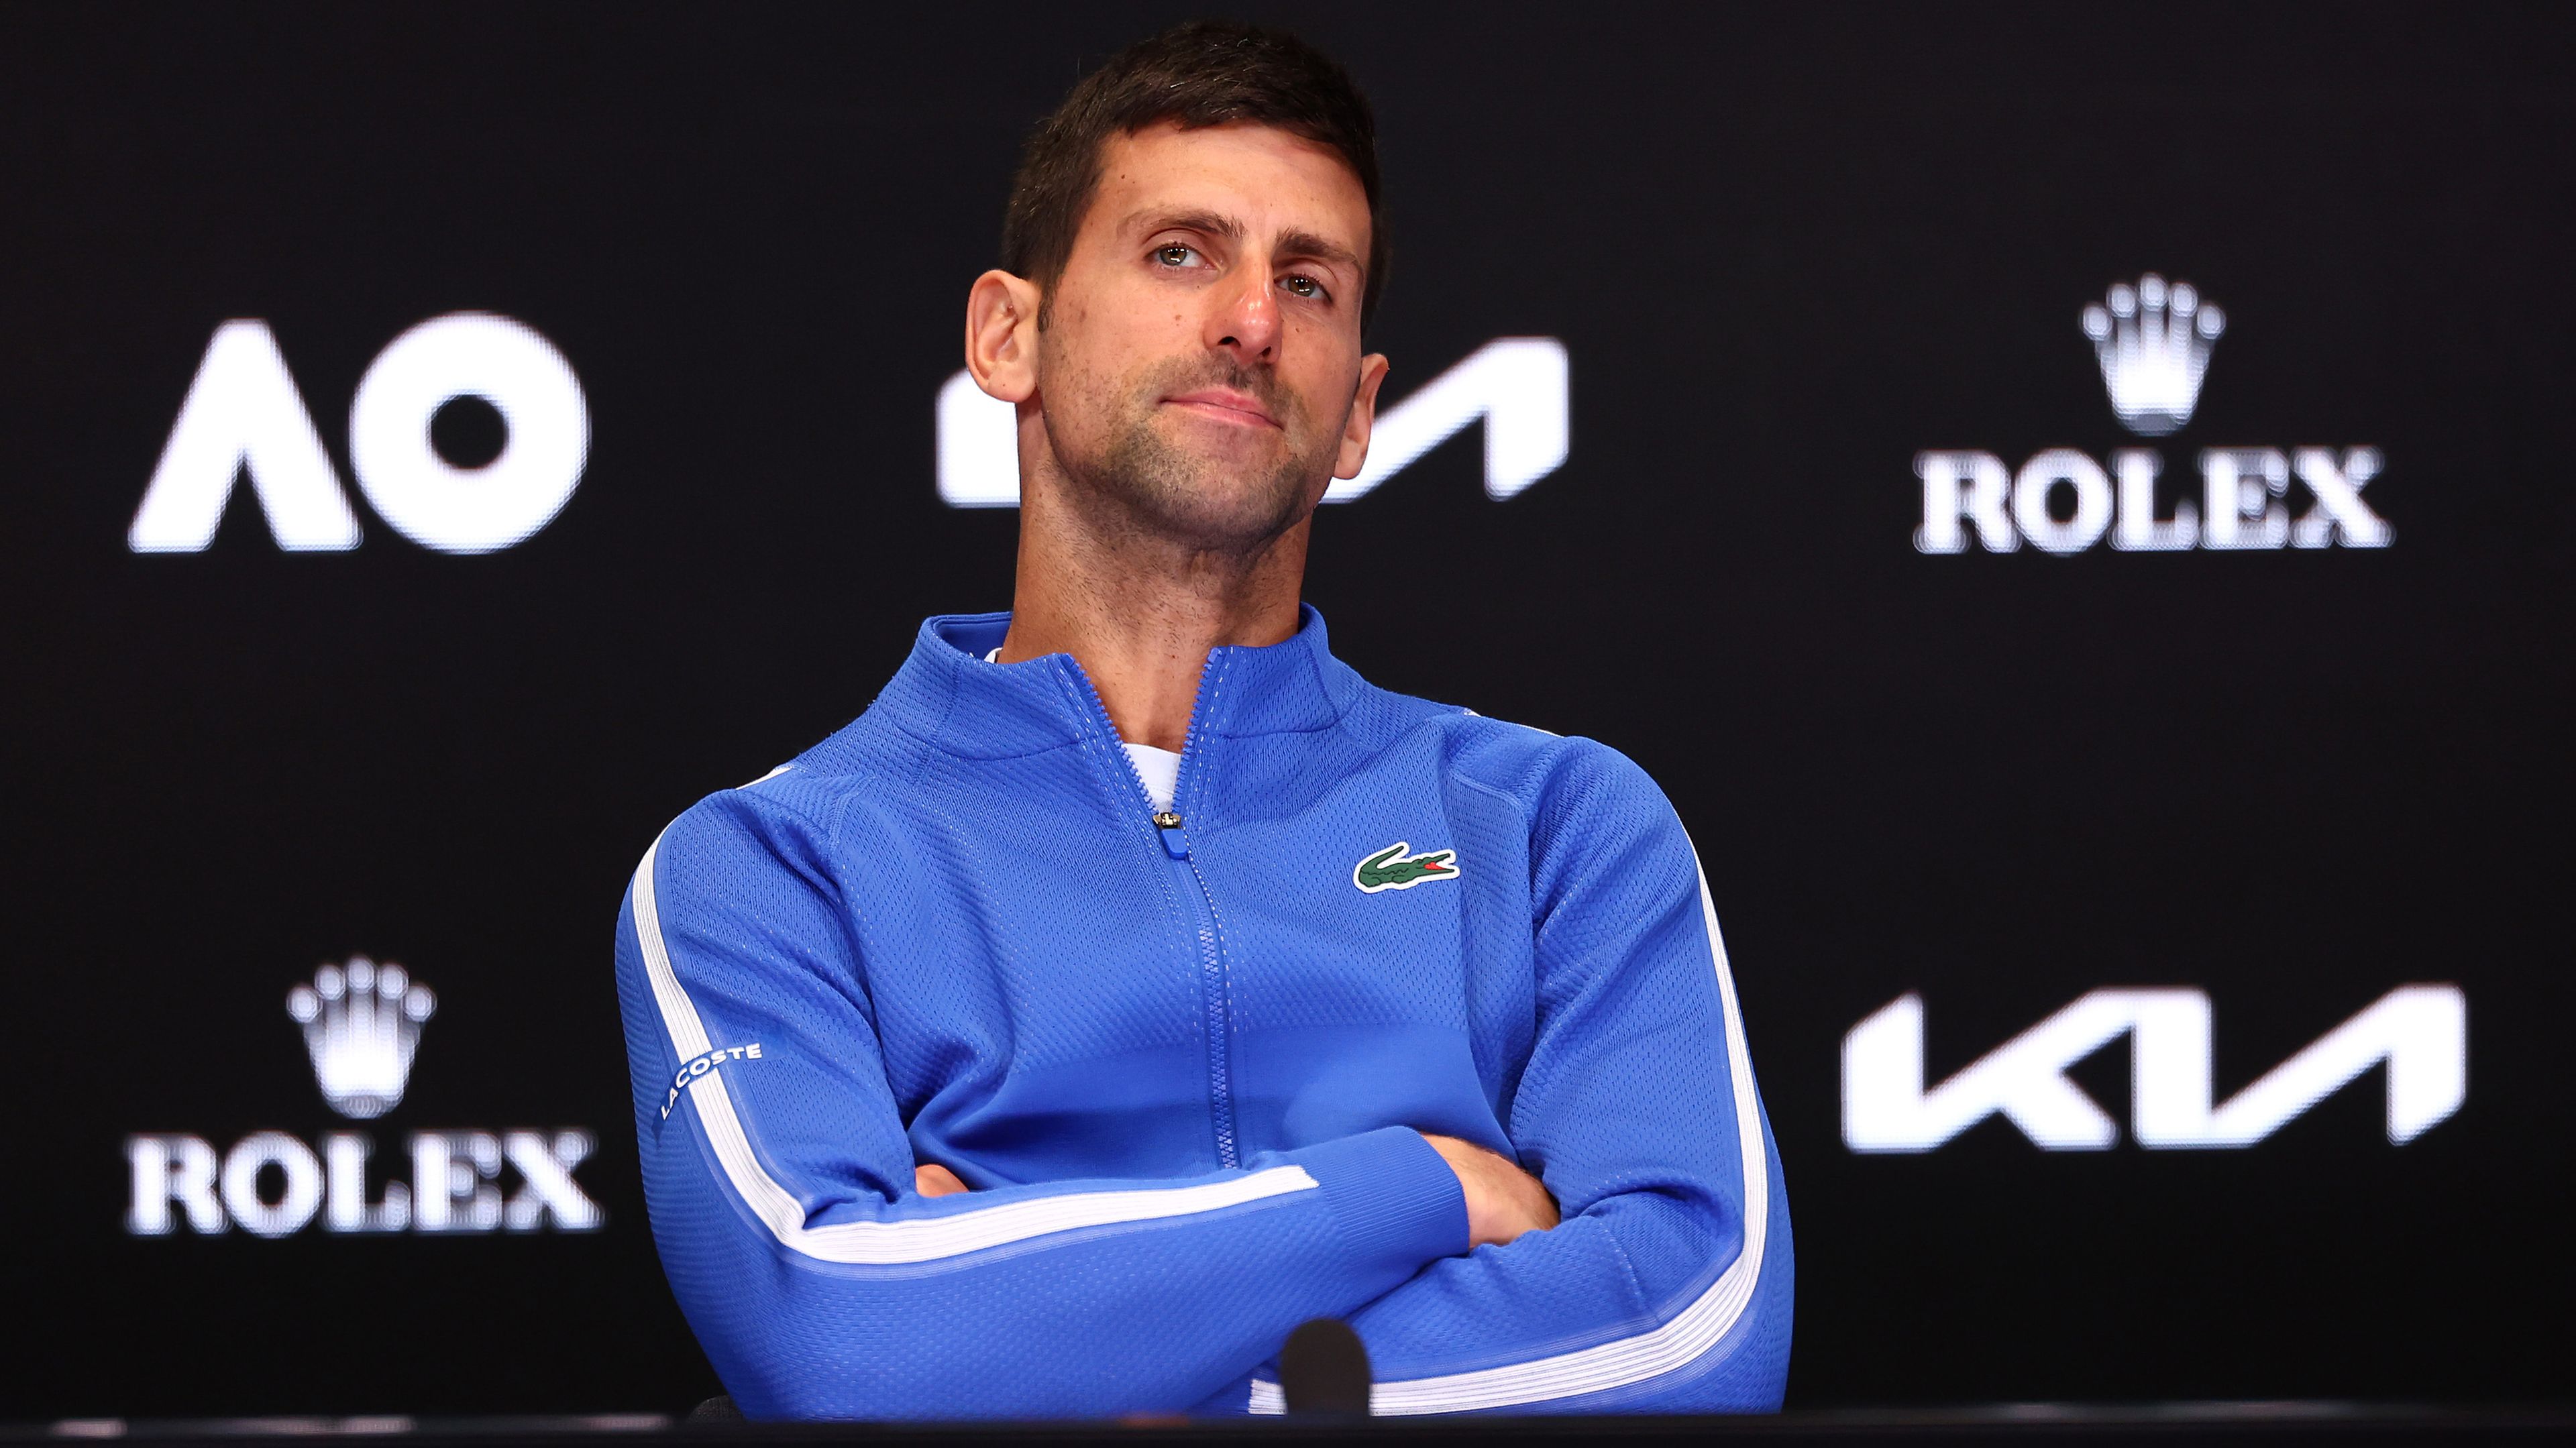 MELBOURNE, AUSTRALIA - JANUARY 26: Novak Djokovic of Serbia talks to the media at a press conference following his semifinal singles match loss against Jannik Sinner of Italy during the 2024 Australian Open at Melbourne Park on January 26, 2024 in Melbourne, Australia. (Photo by Graham Denholm/Getty Images)